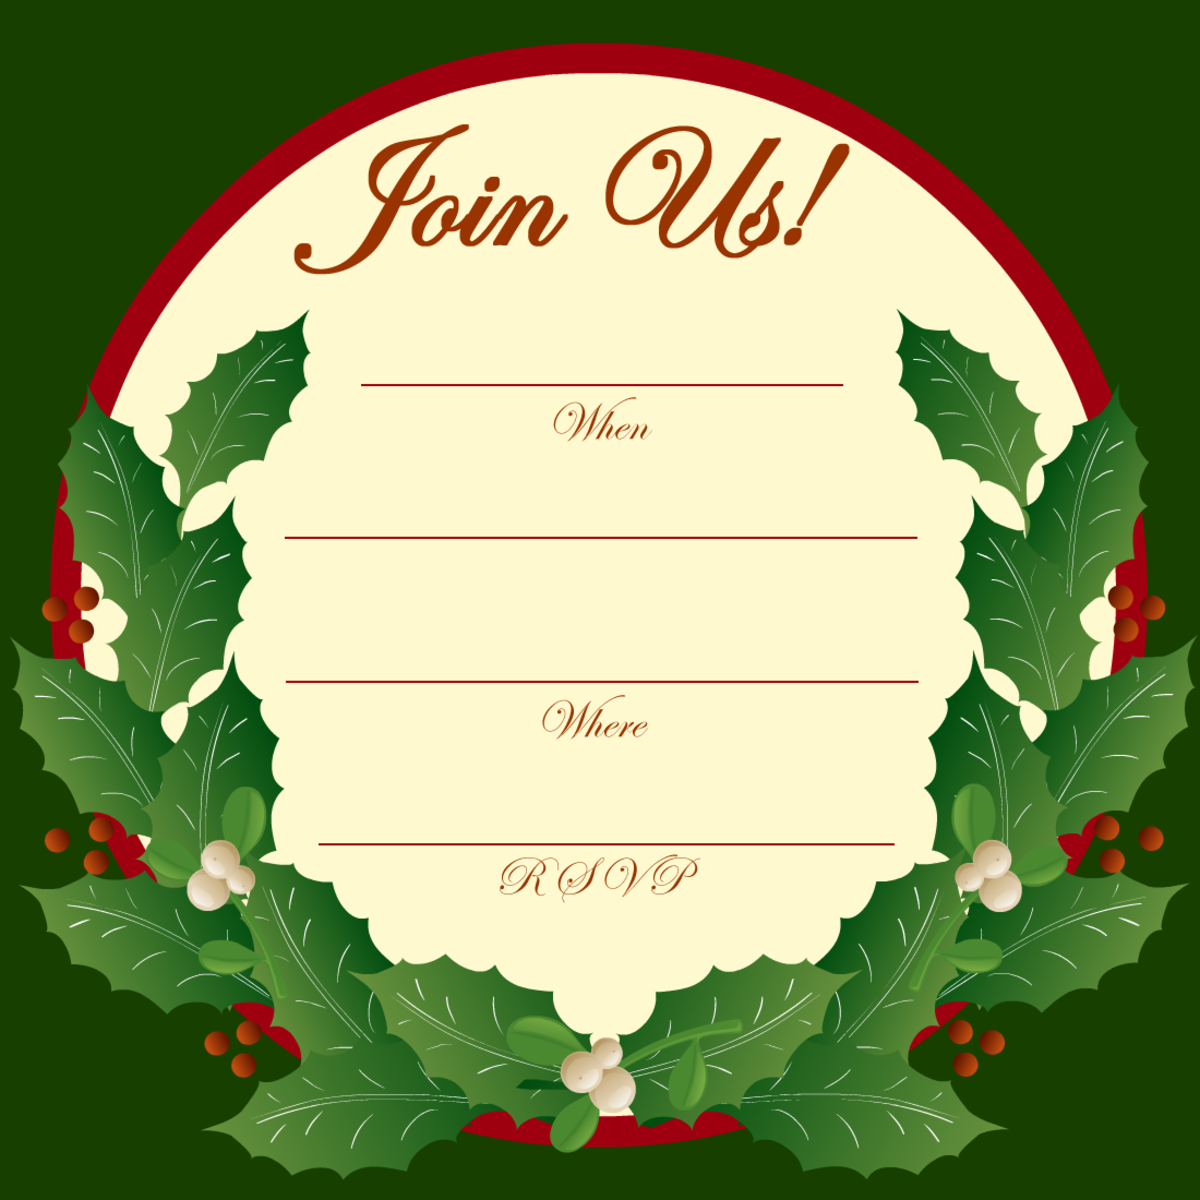 clipart christmas party invitations - photo #10